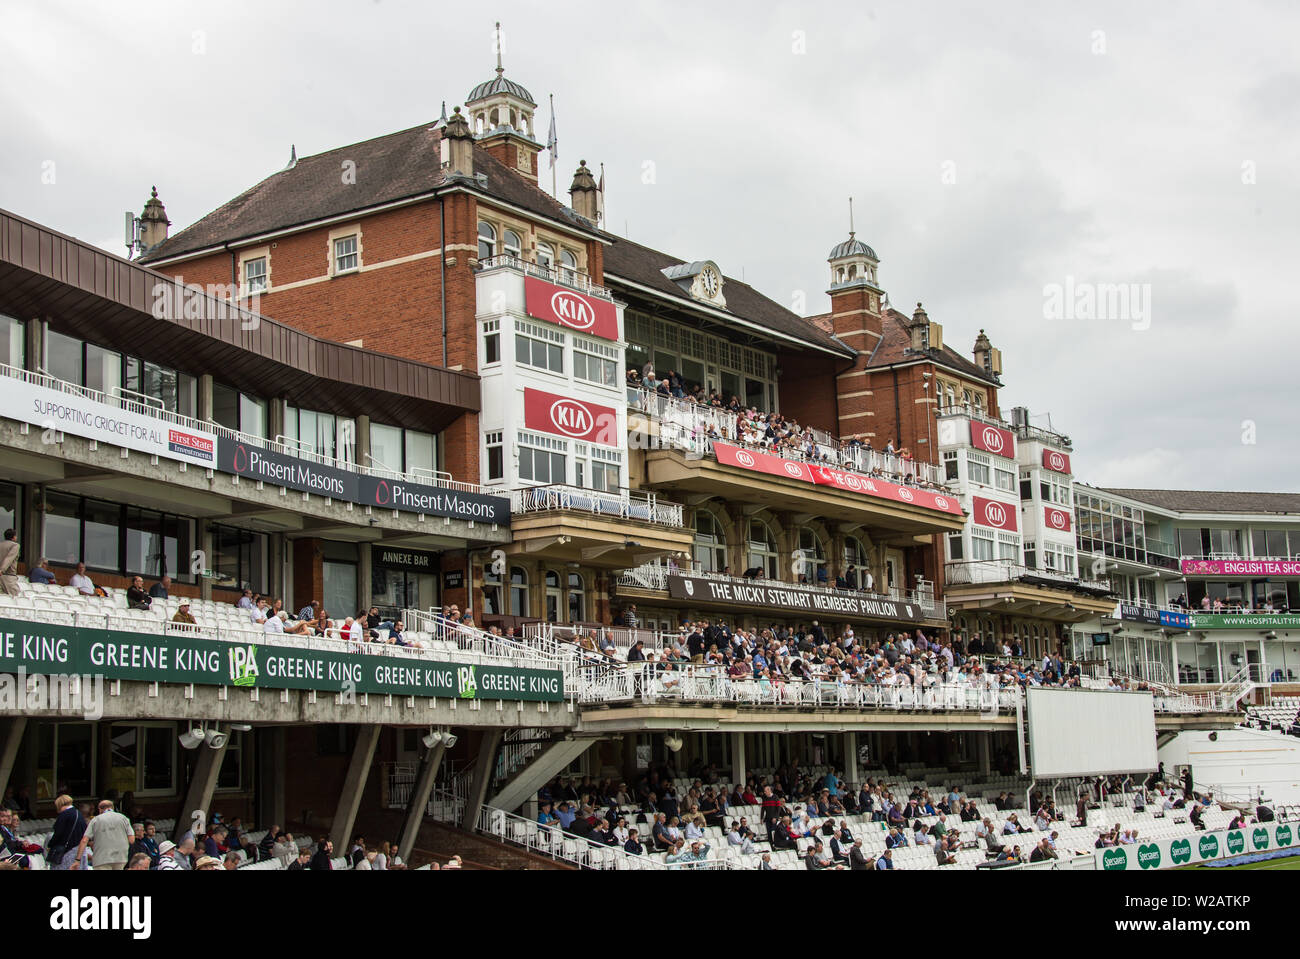 London, UK. 7 July, 2019. The Micky Stewart Members' Pavilion ahead of the first day of the Specsavers County Championship game between Surrey and Kent at the Kia Oval. David Rowe/Alamy Live News Stock Photo